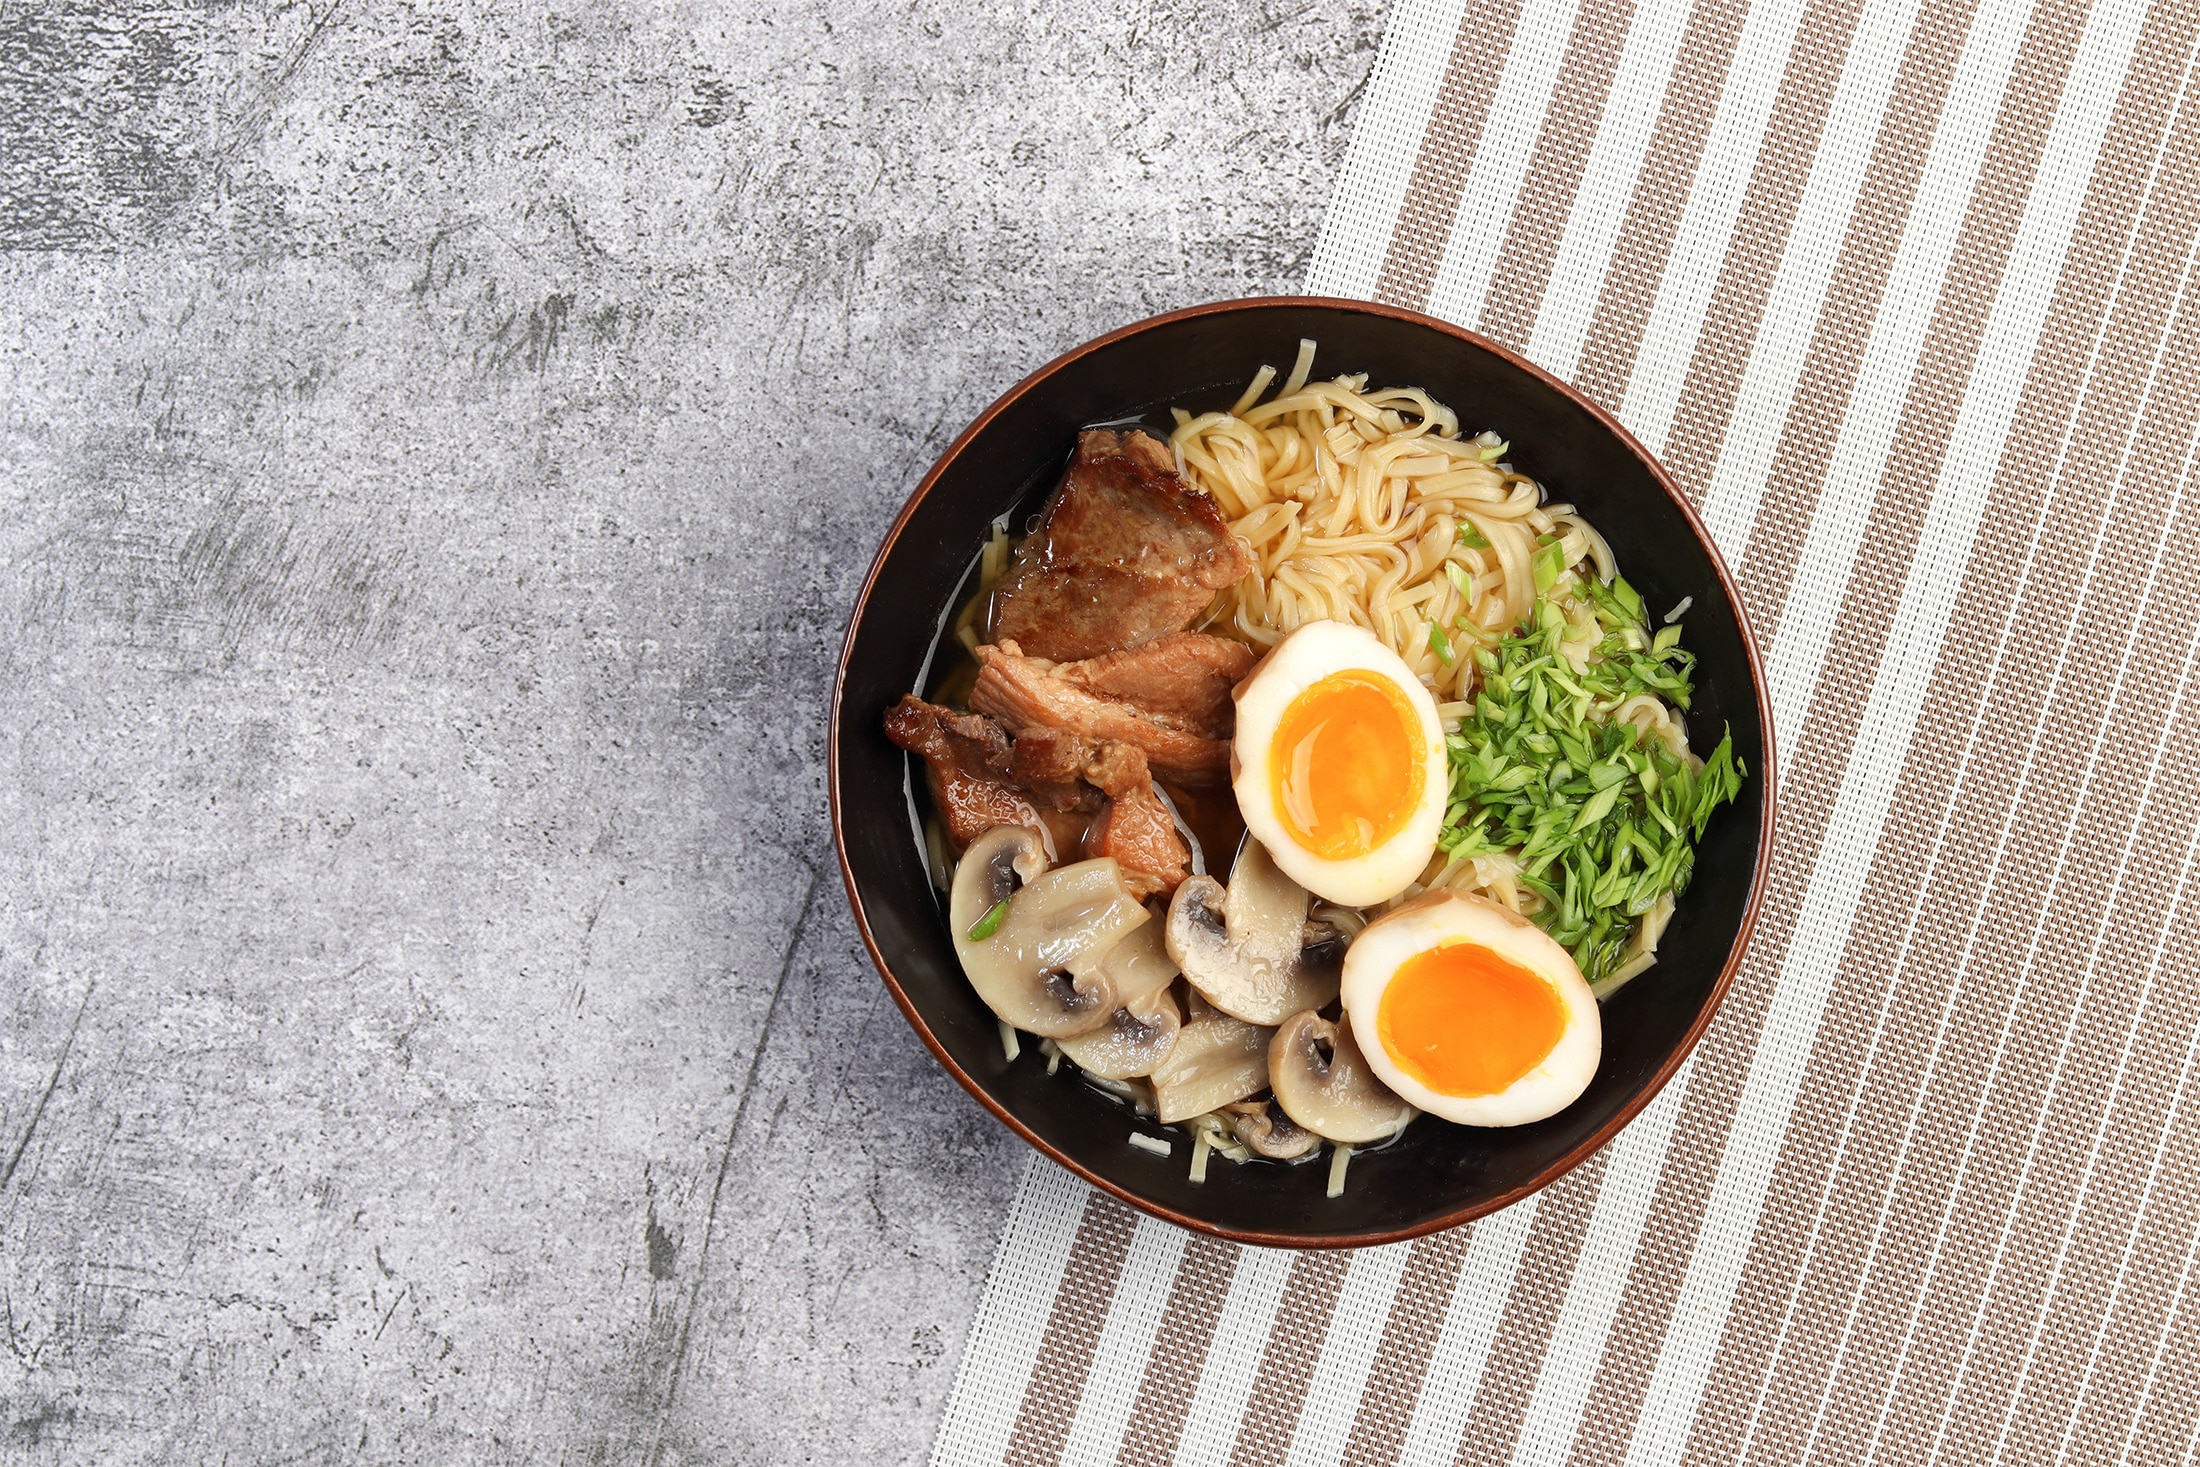 Ramen topped with pork belly, mushrooms, soft-boiled eggs, and spring onions